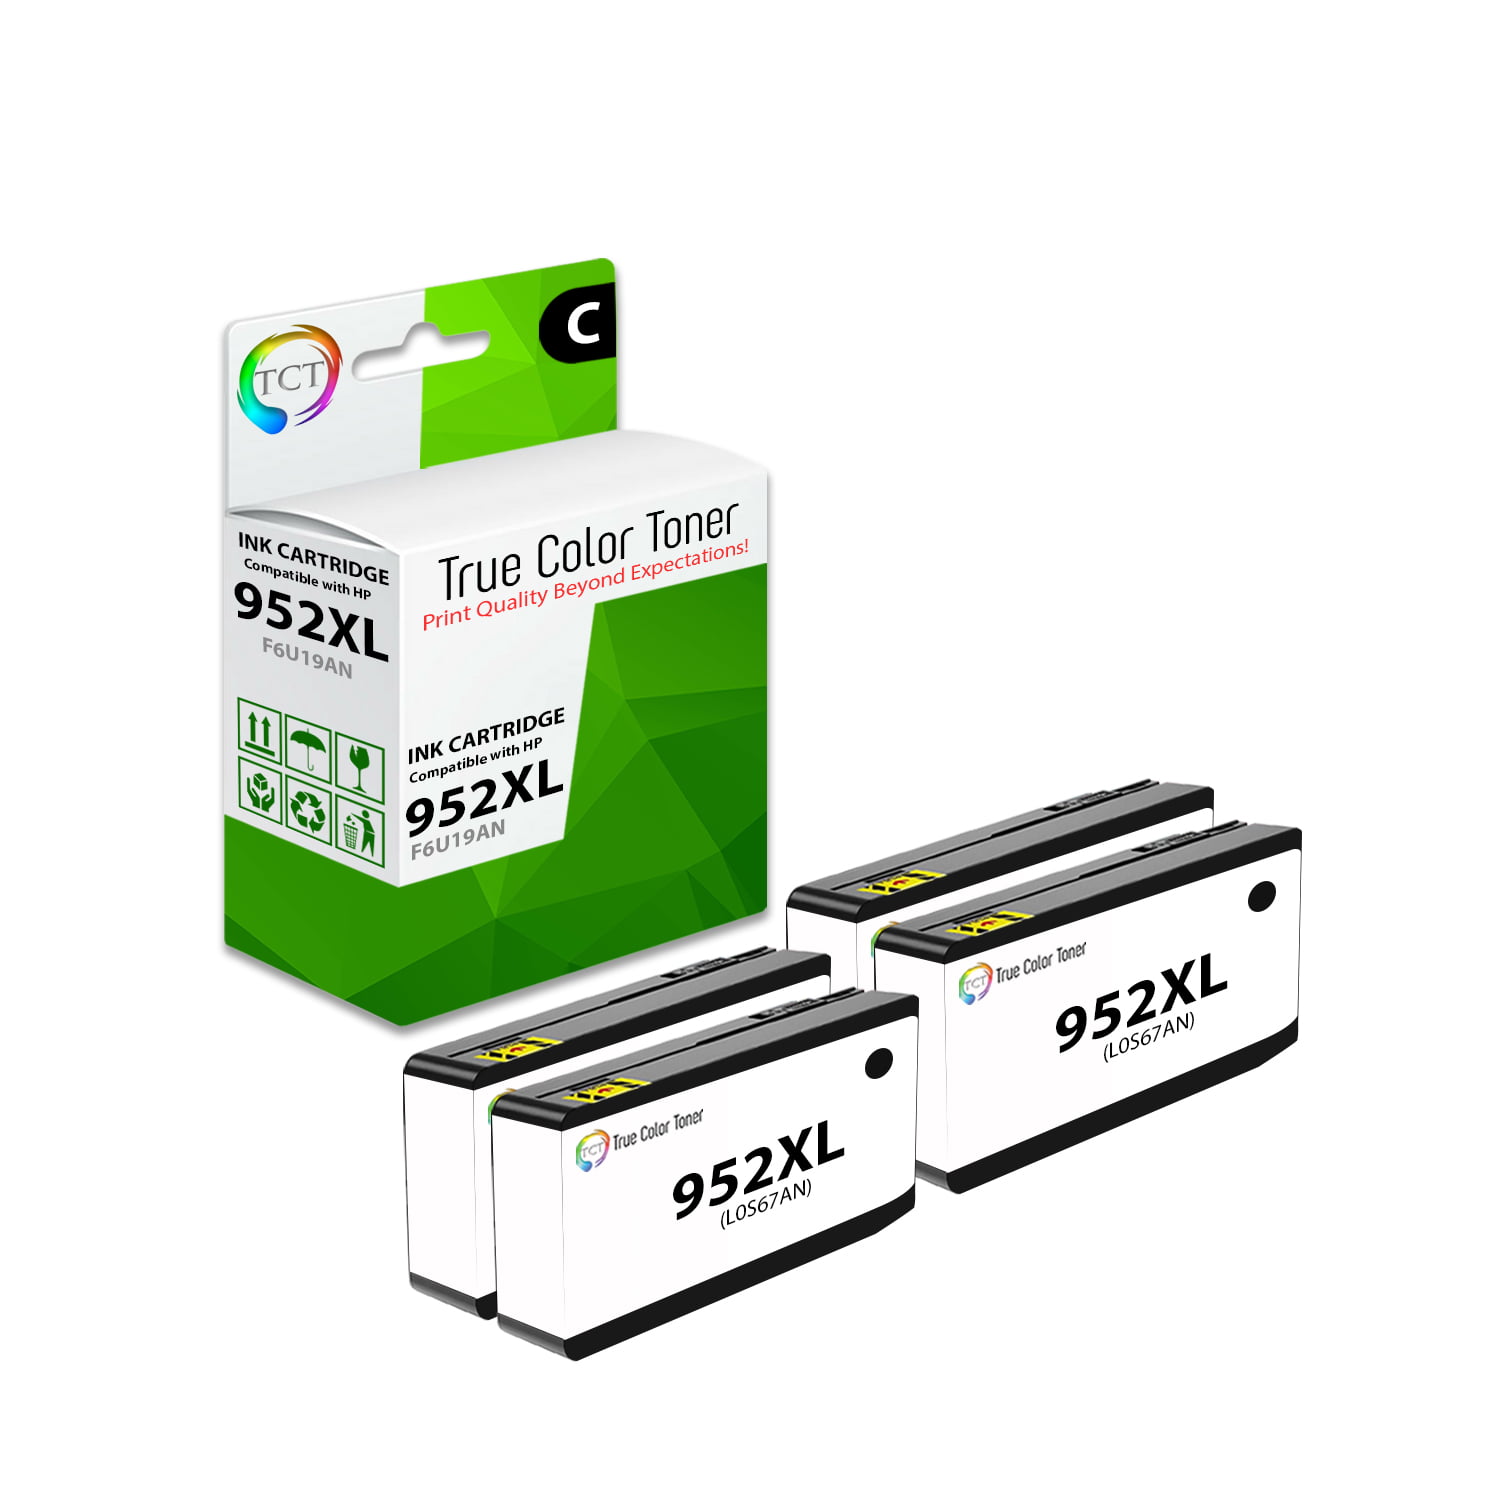 vaas pion Socialistisch TCT Compatible Ink Cartridge Replacement for HP 952XL 952 XL F6U19AN Black  works with HP OfficeJet 7740 8702 8715, Pro 8210 8216 8218 8710 8714 8720  8726 8730 8740 8746 Printers (2,000 Pages) - 4 Pack - Walmart.com